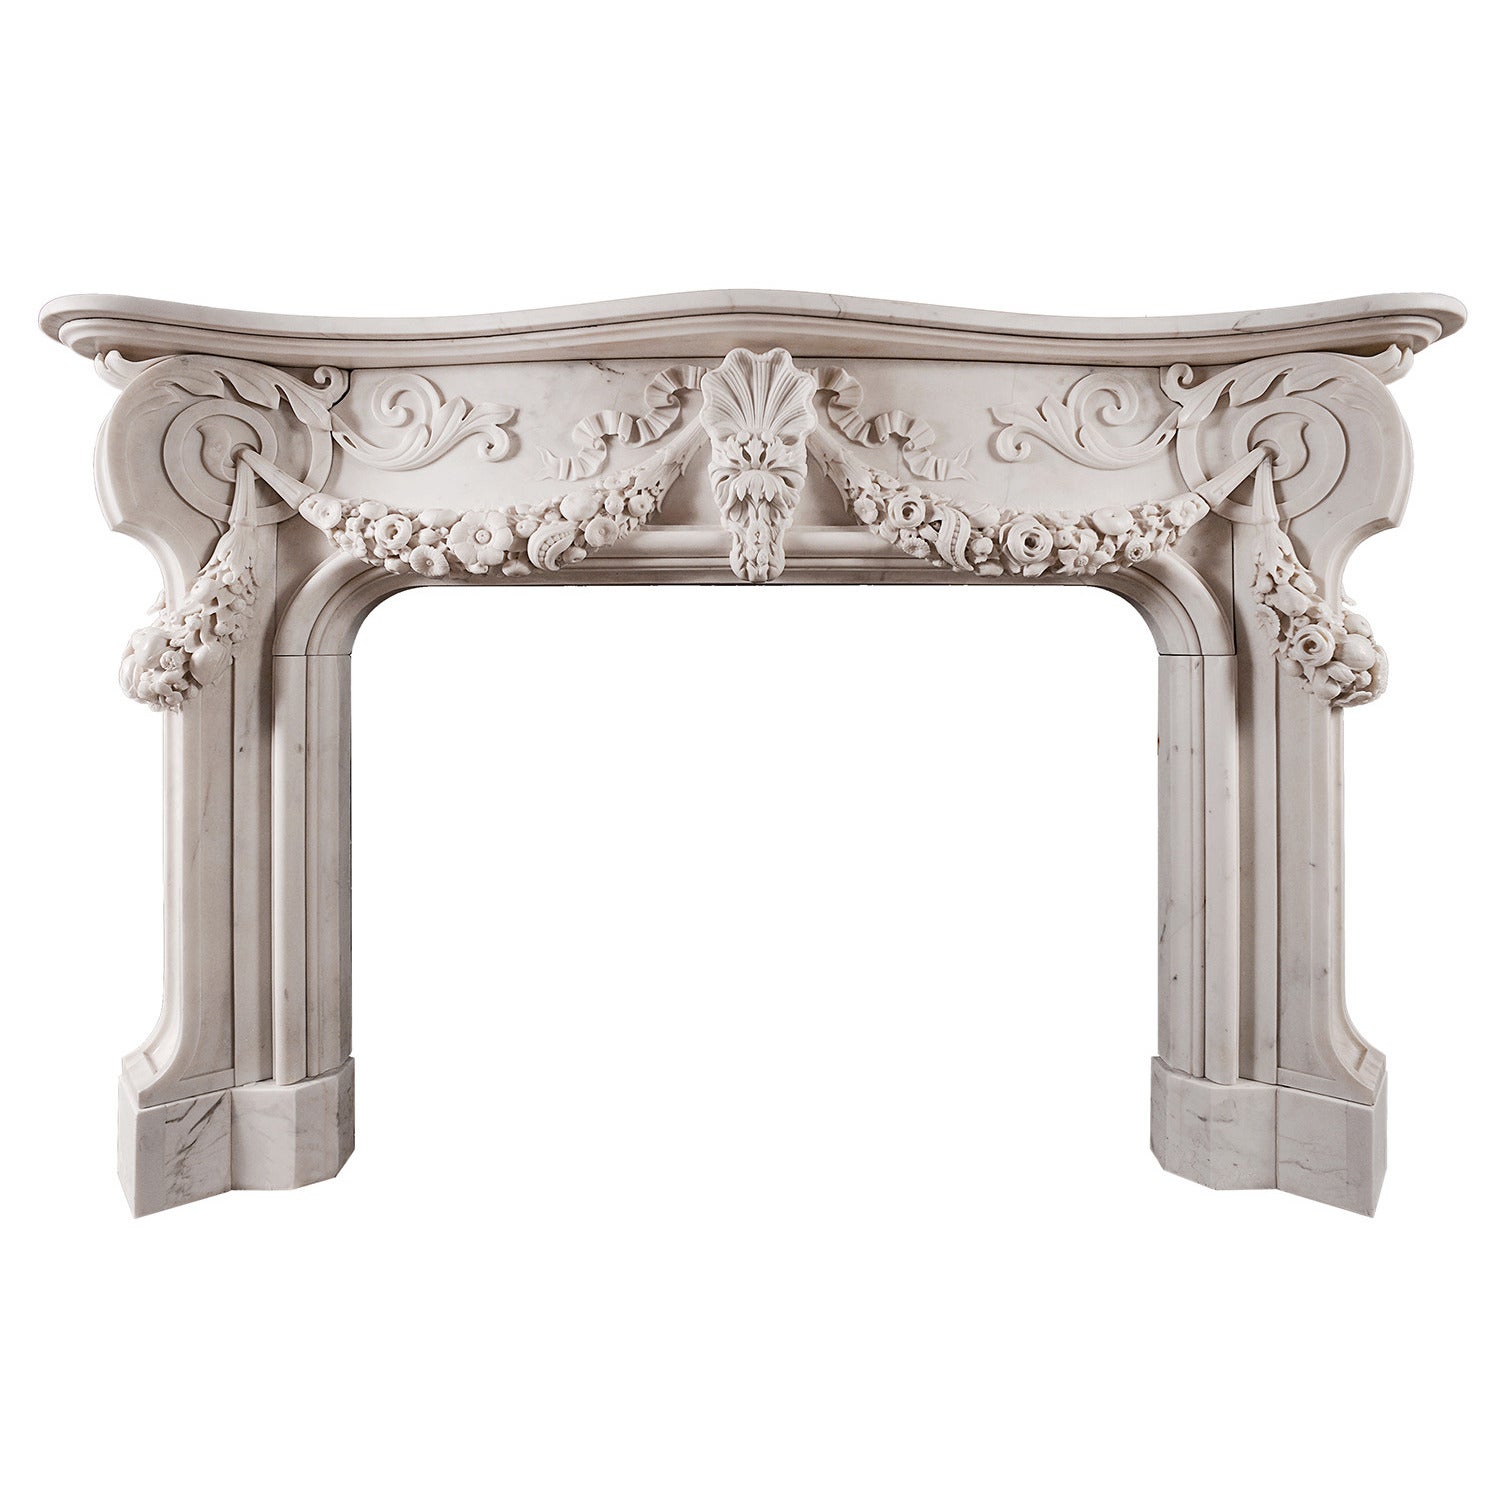 Italian Statuary Marble Fireplace Mantel in the Baroque Manner